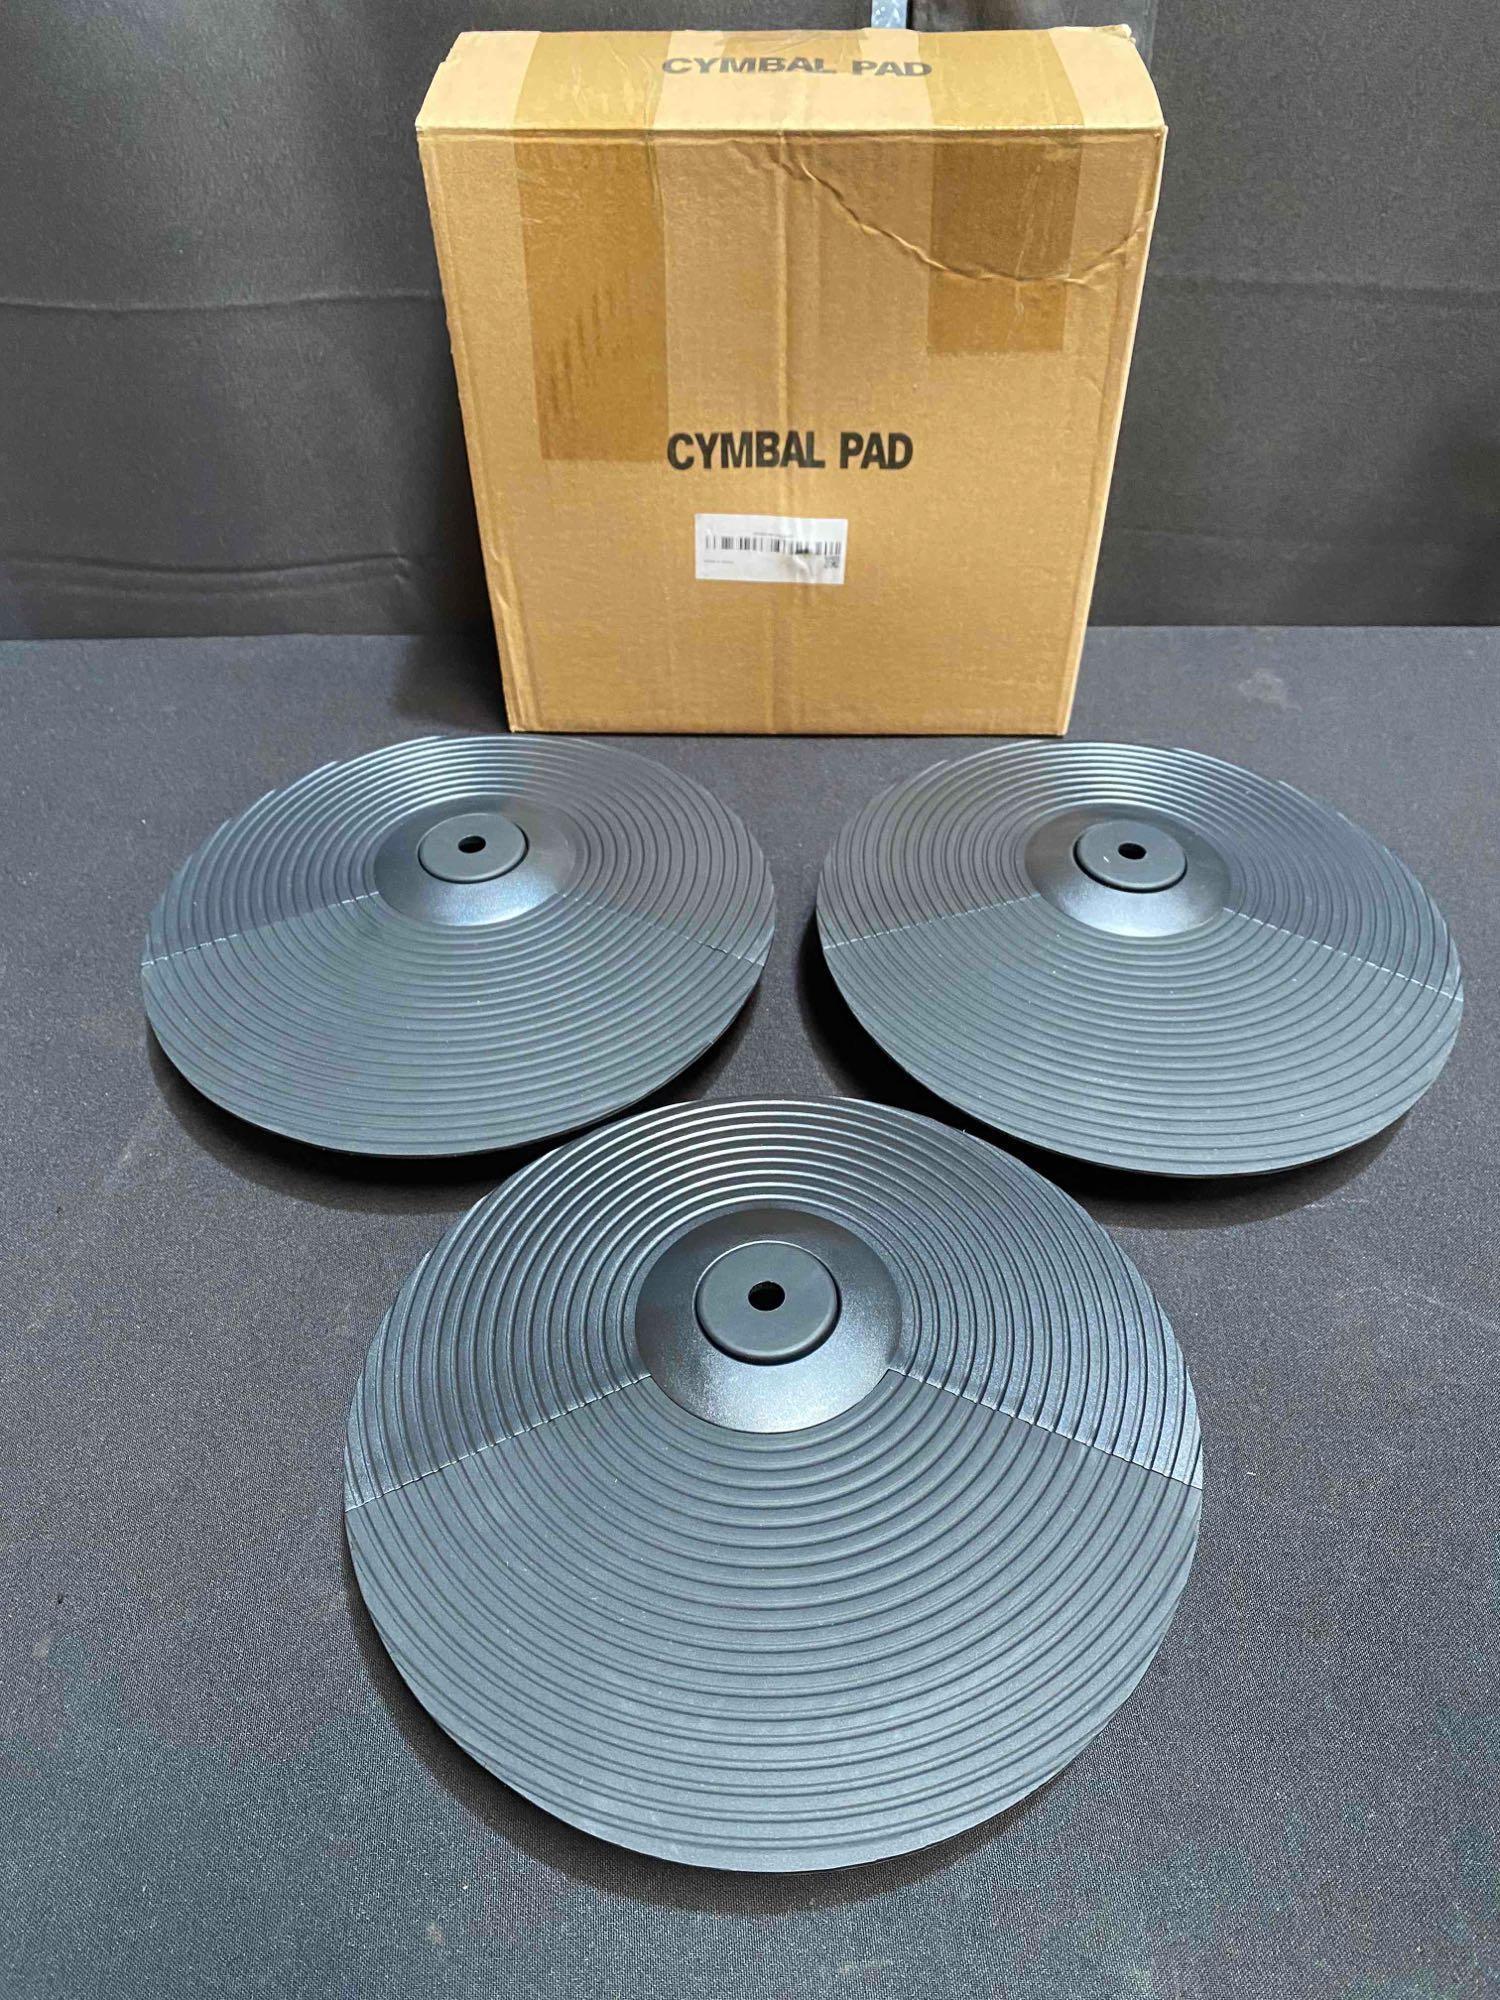 Set of 3 Cymbal Pad for Donner Electric Drum Set for Beginner Adults